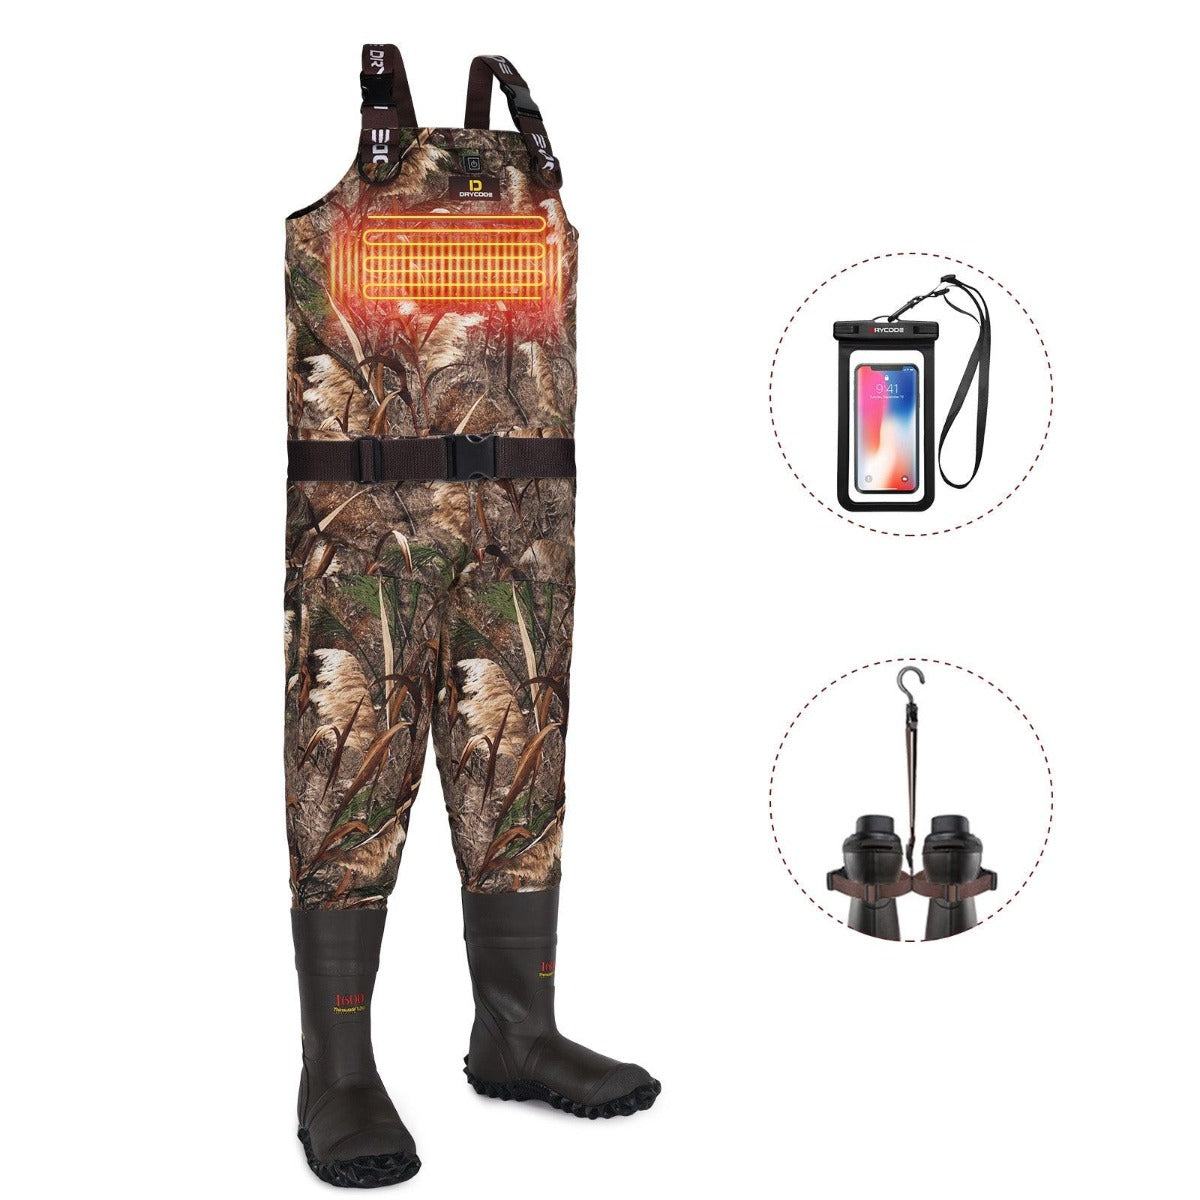 BELLE DURA Fishing Waders for Men with Boots,Chest Waders for